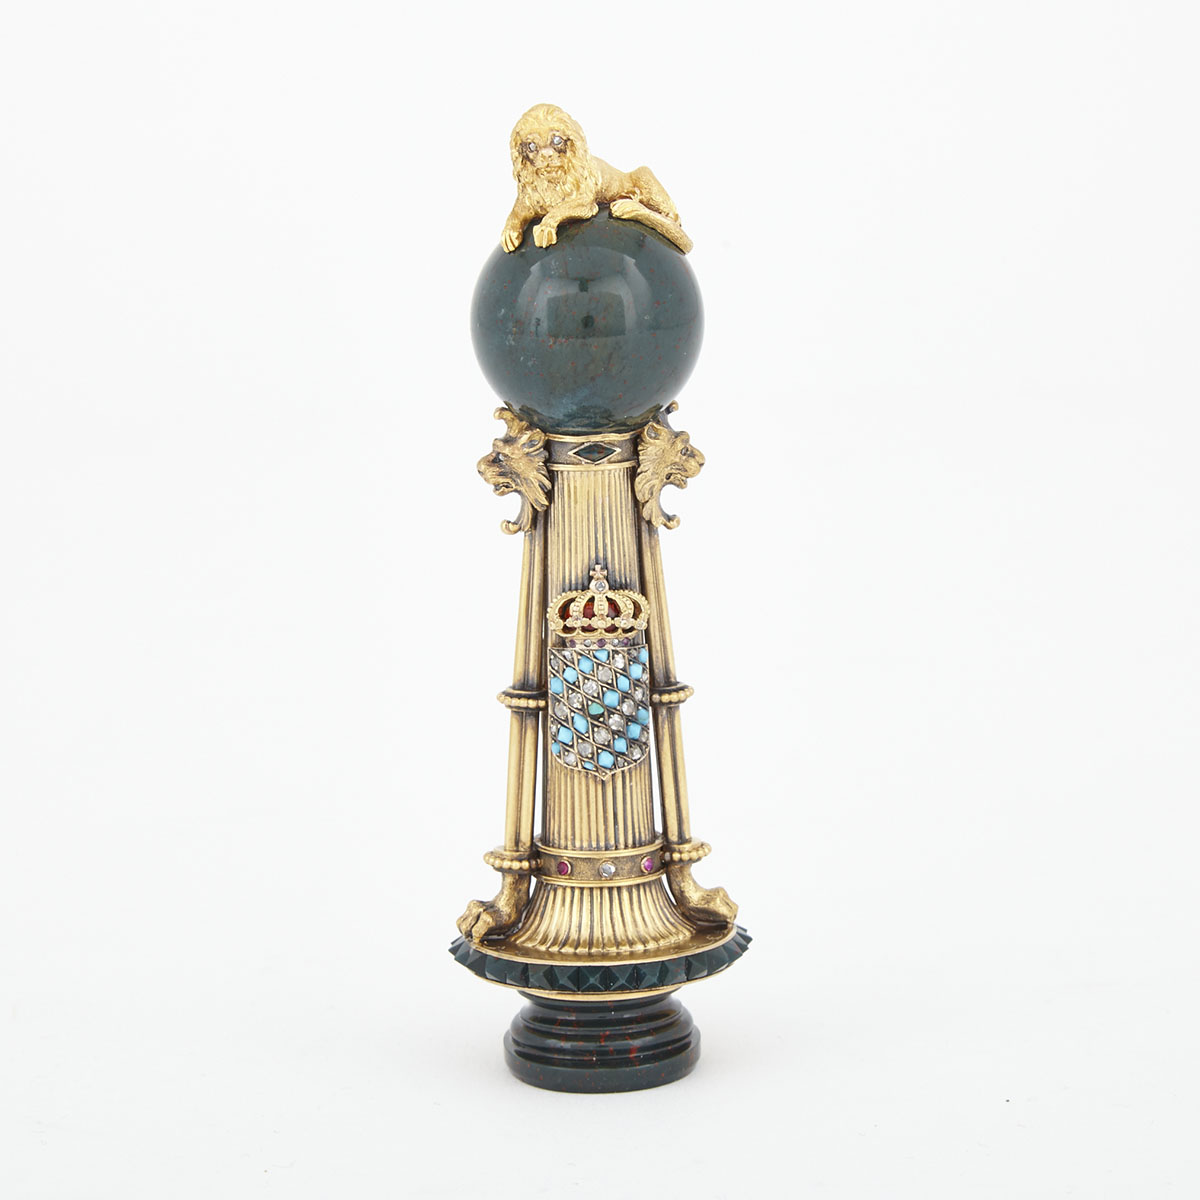 Bavarian Jewelled Gold and Bloodstone Desk Seal, late 19th century